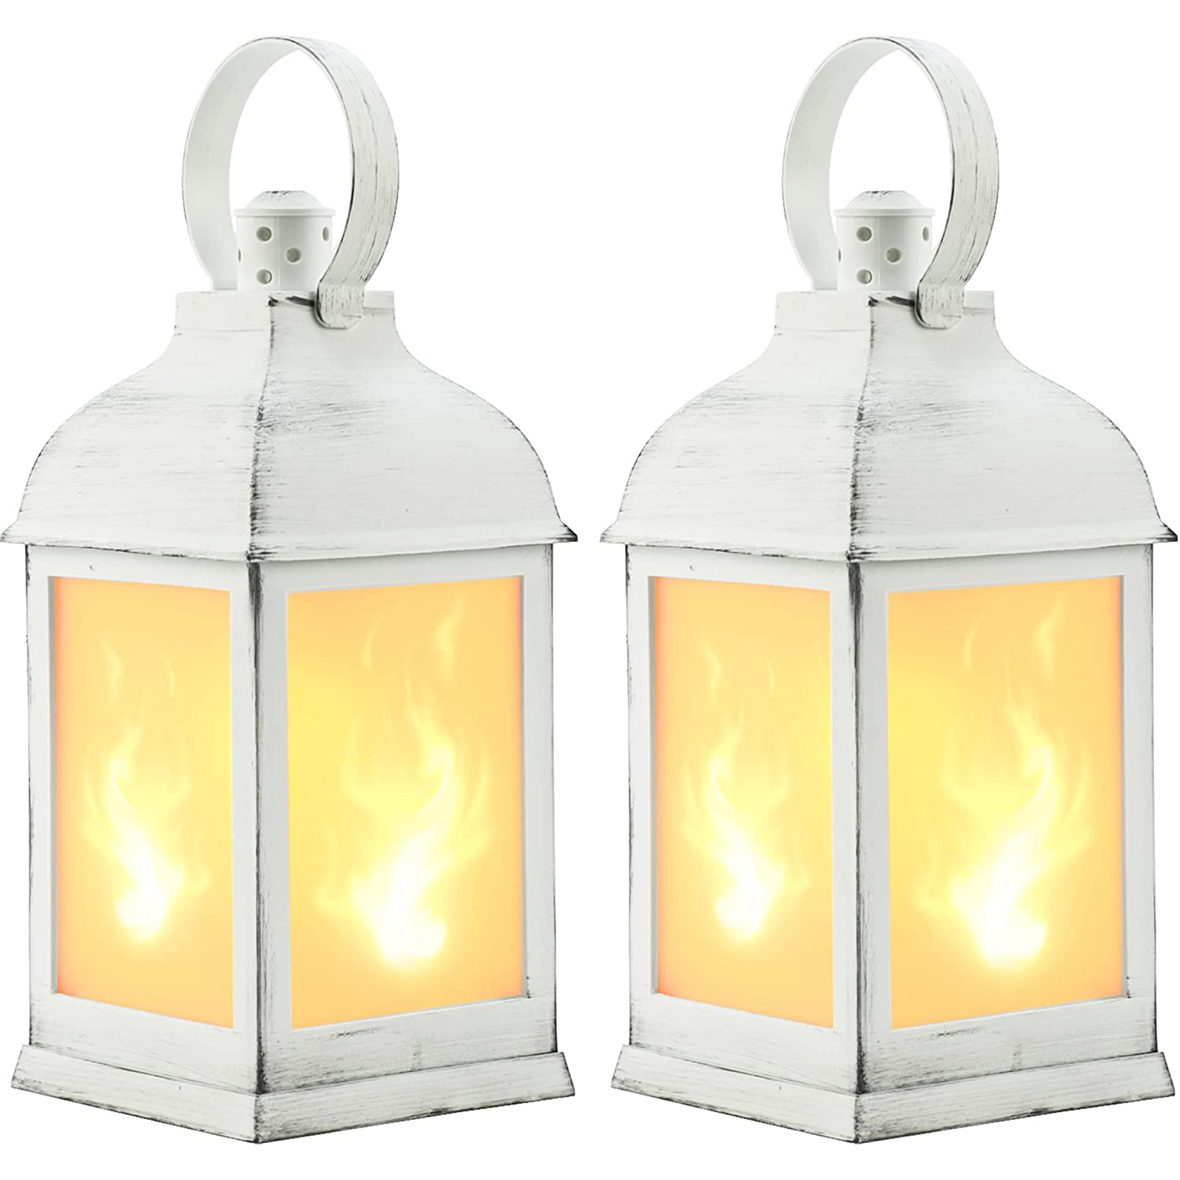 Yongmao Vintage Decorative Lanterns, Flame LED Lantern Wedding Decorations, Indoor Lanterns Christmas Decorative, Outdoor Hanging Lanterns with 6 Hours Timer for Garden Patio Deck Yard Path (2 Pack)